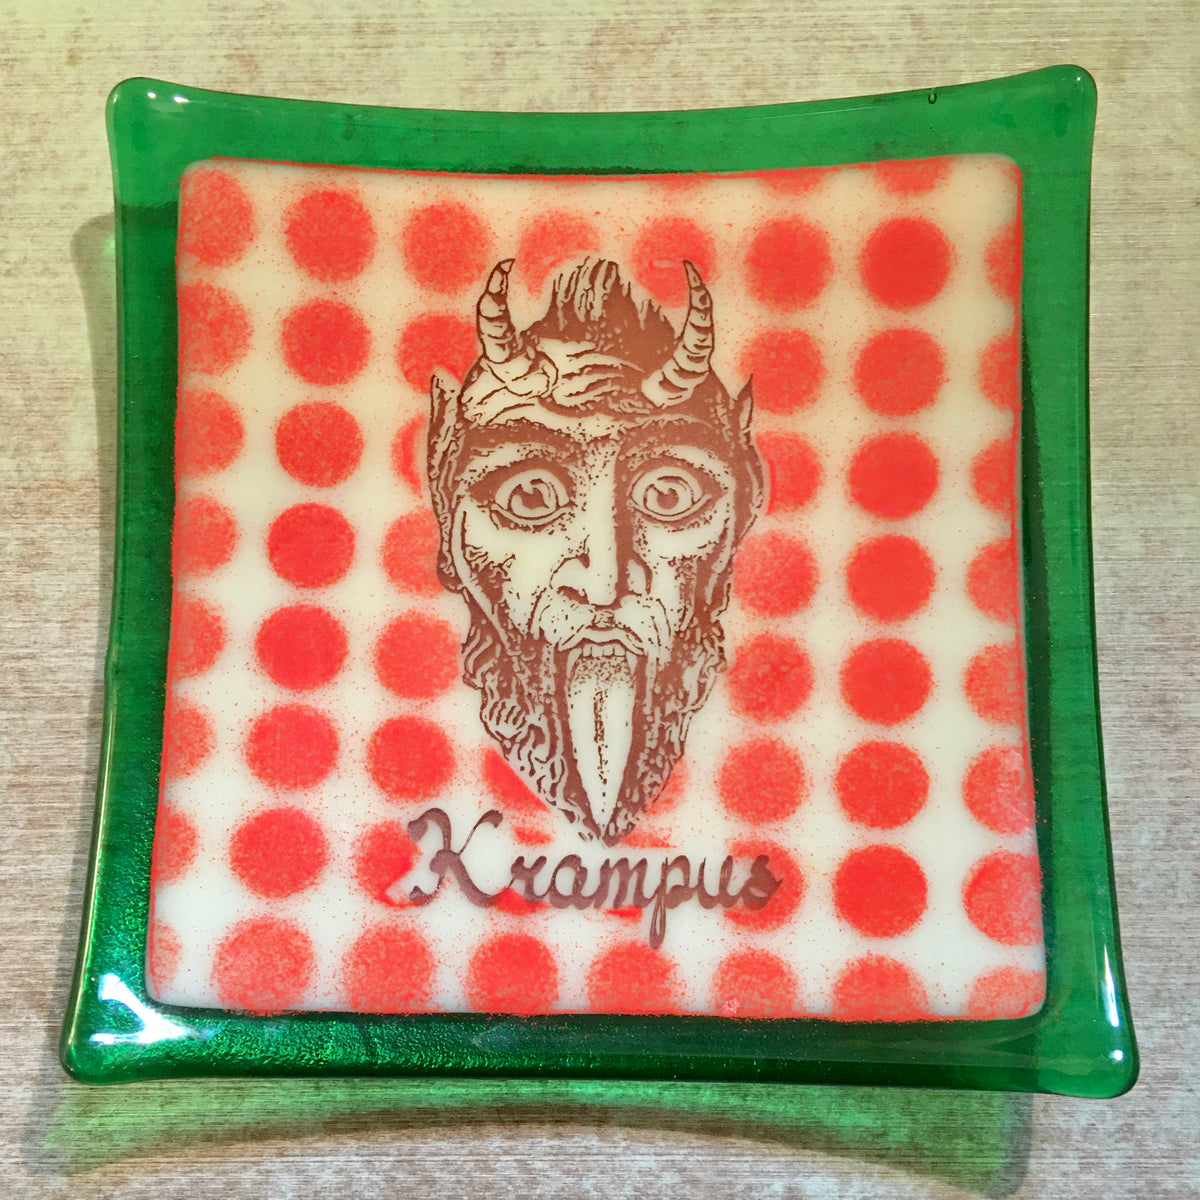 Krampus Dish with Red Polka Dots